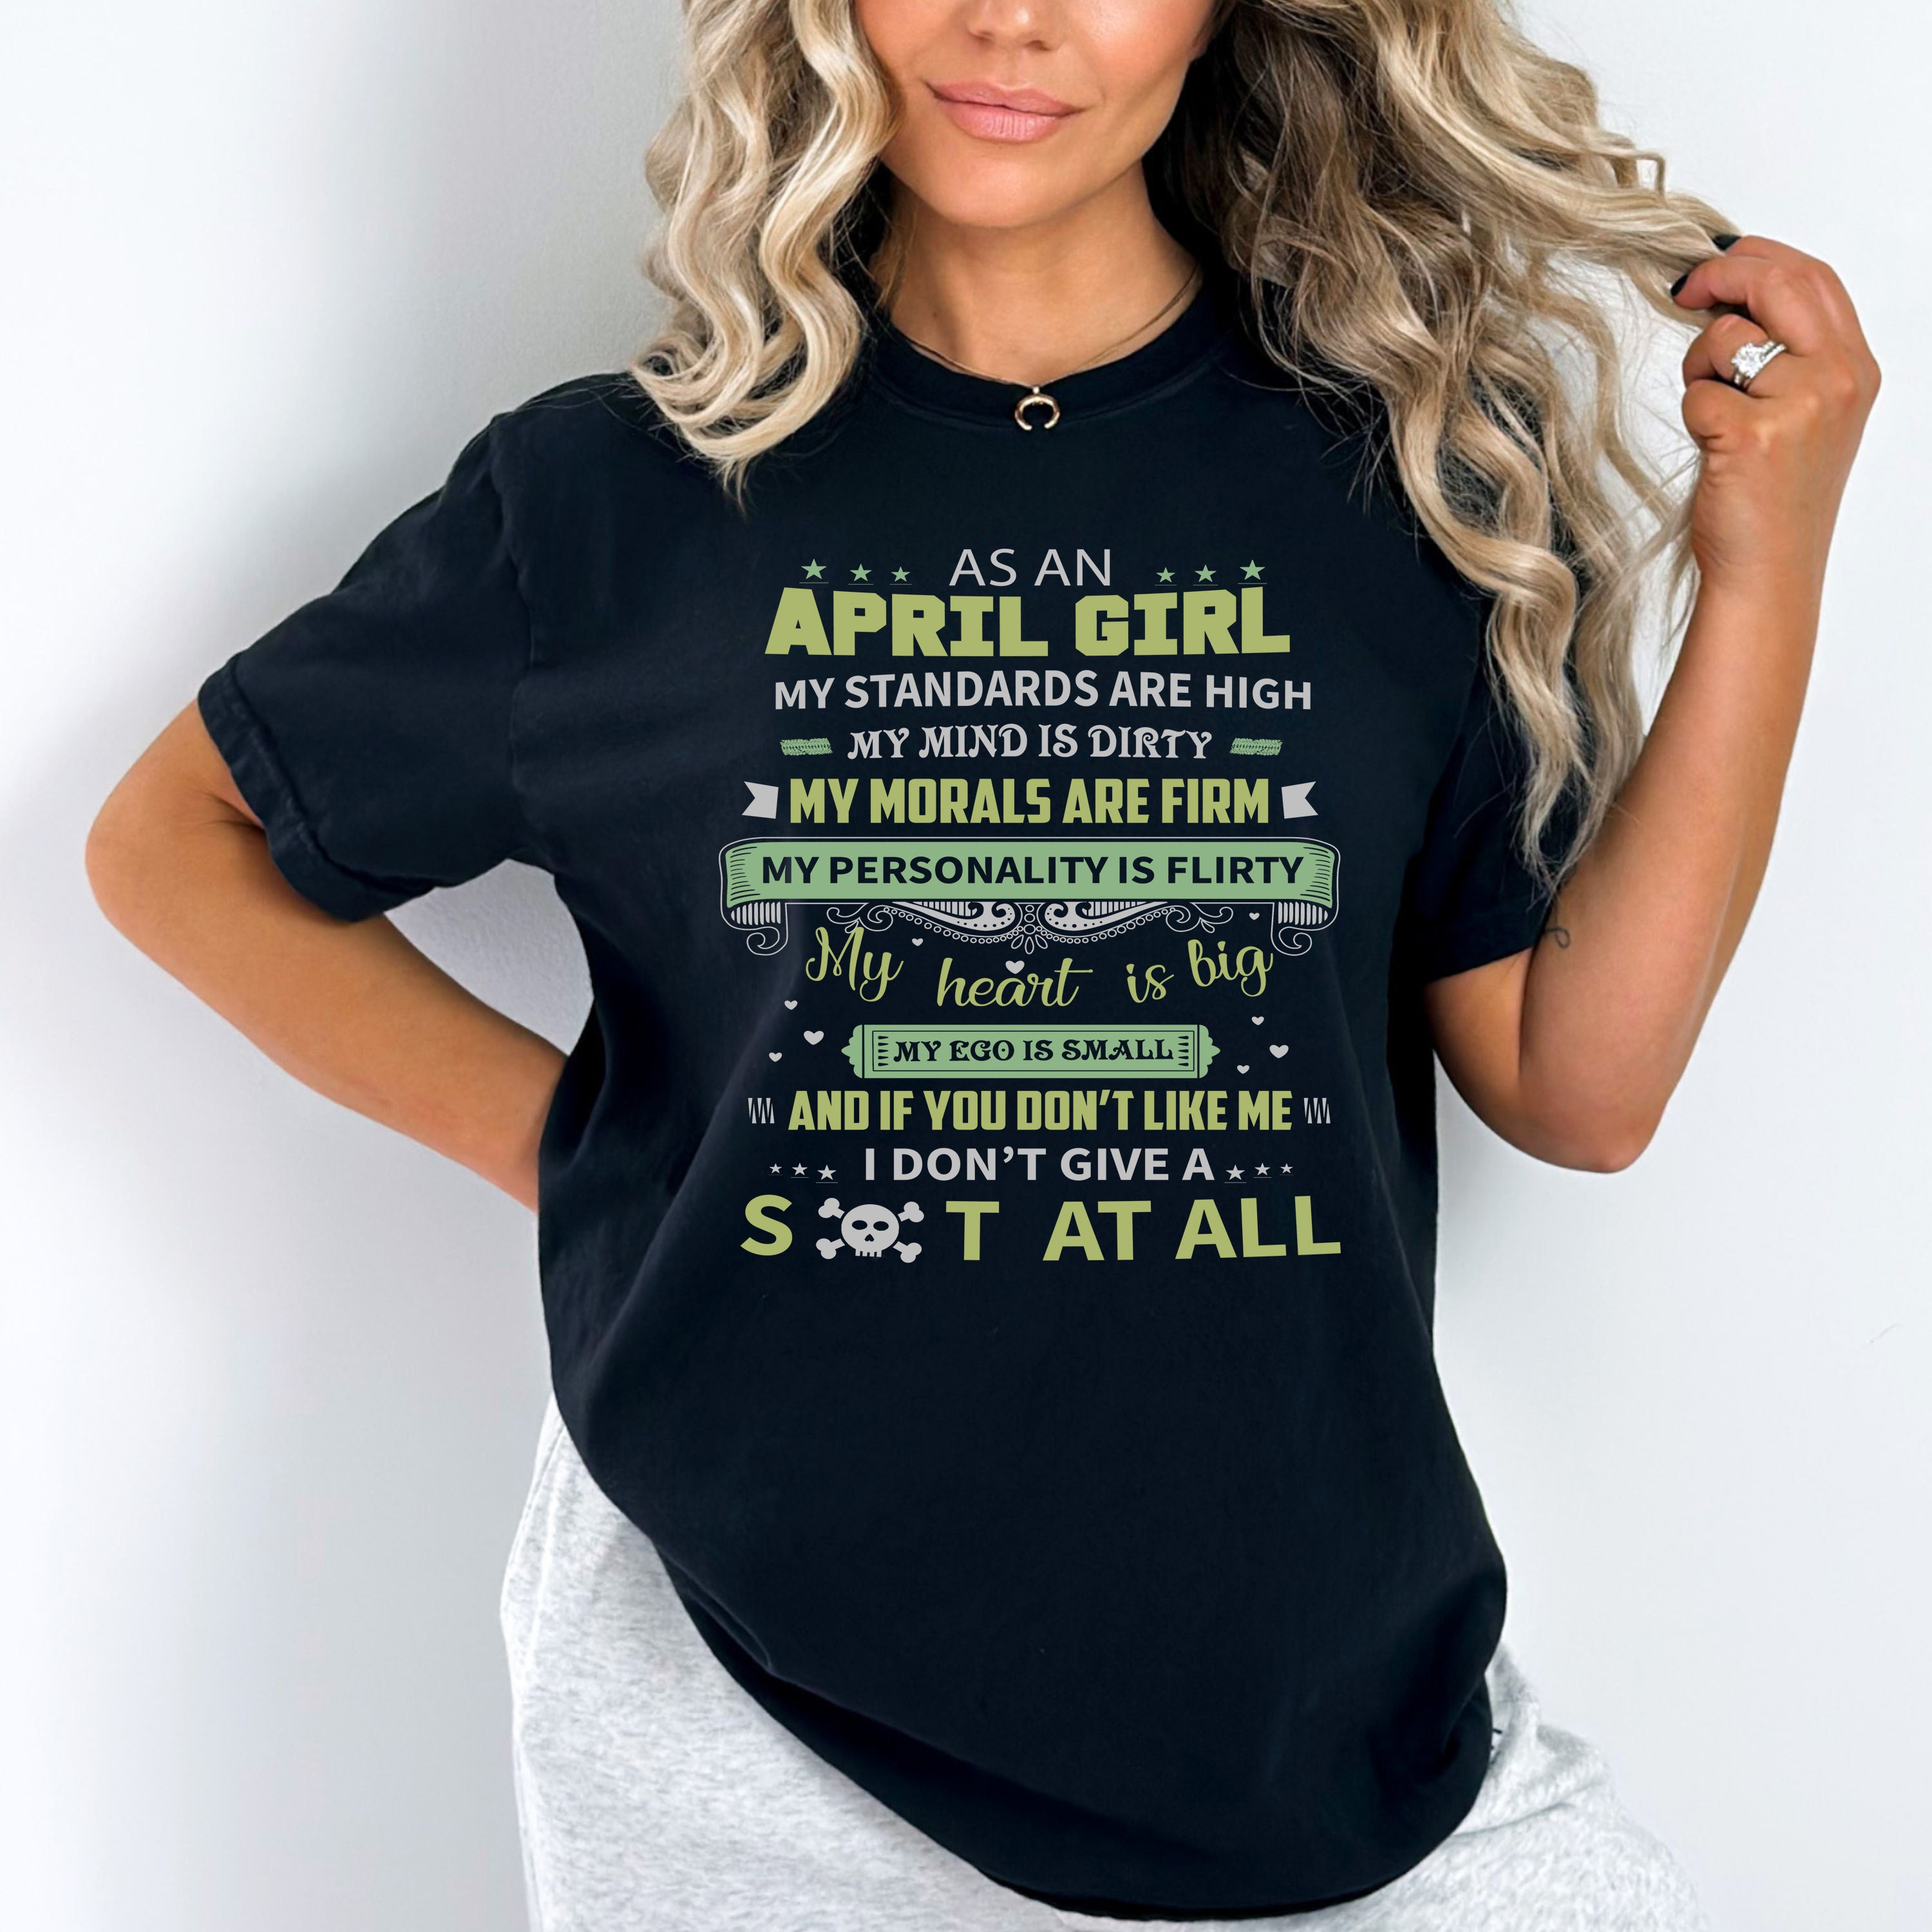 "As An April Girl My Standards Are High"